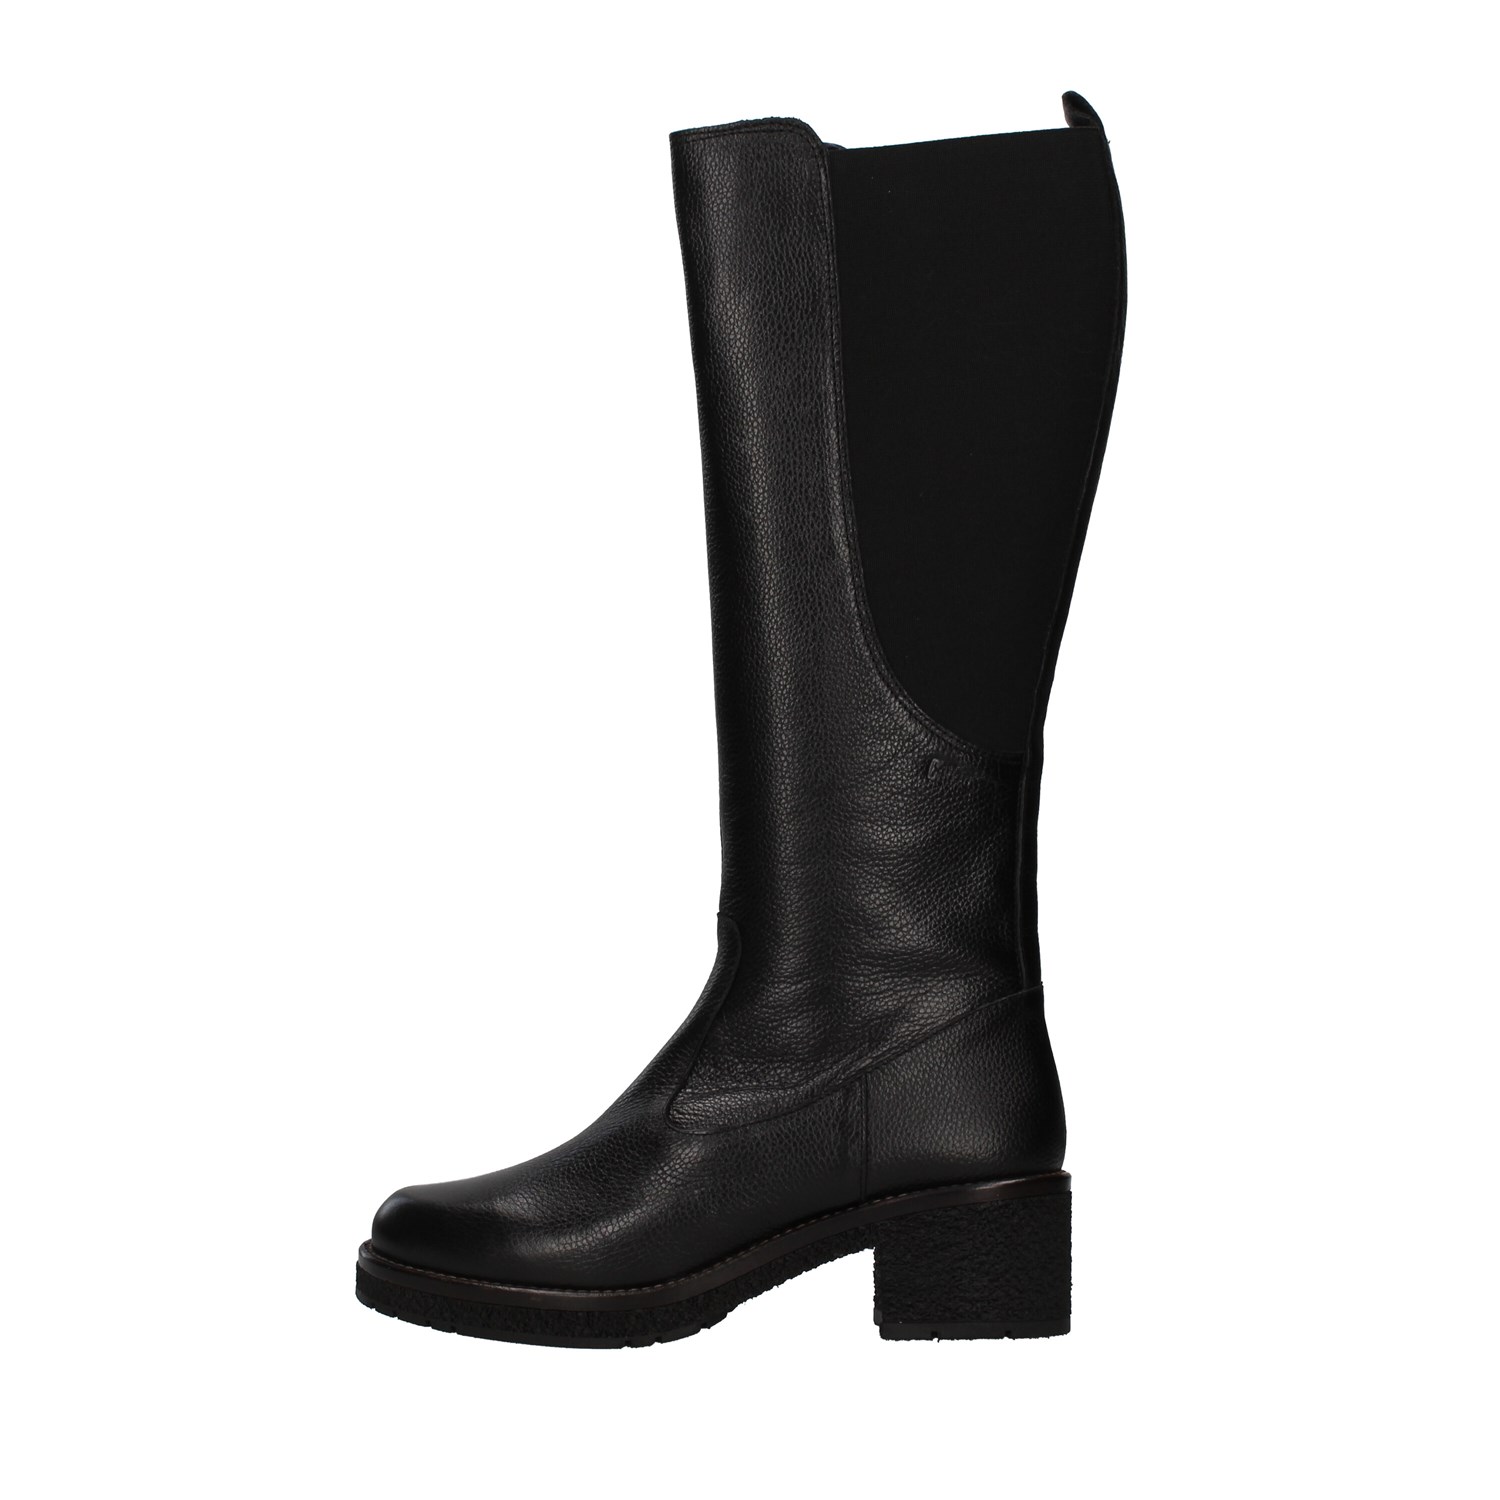 Callaghan Shoes Woman boots BLACK 29506